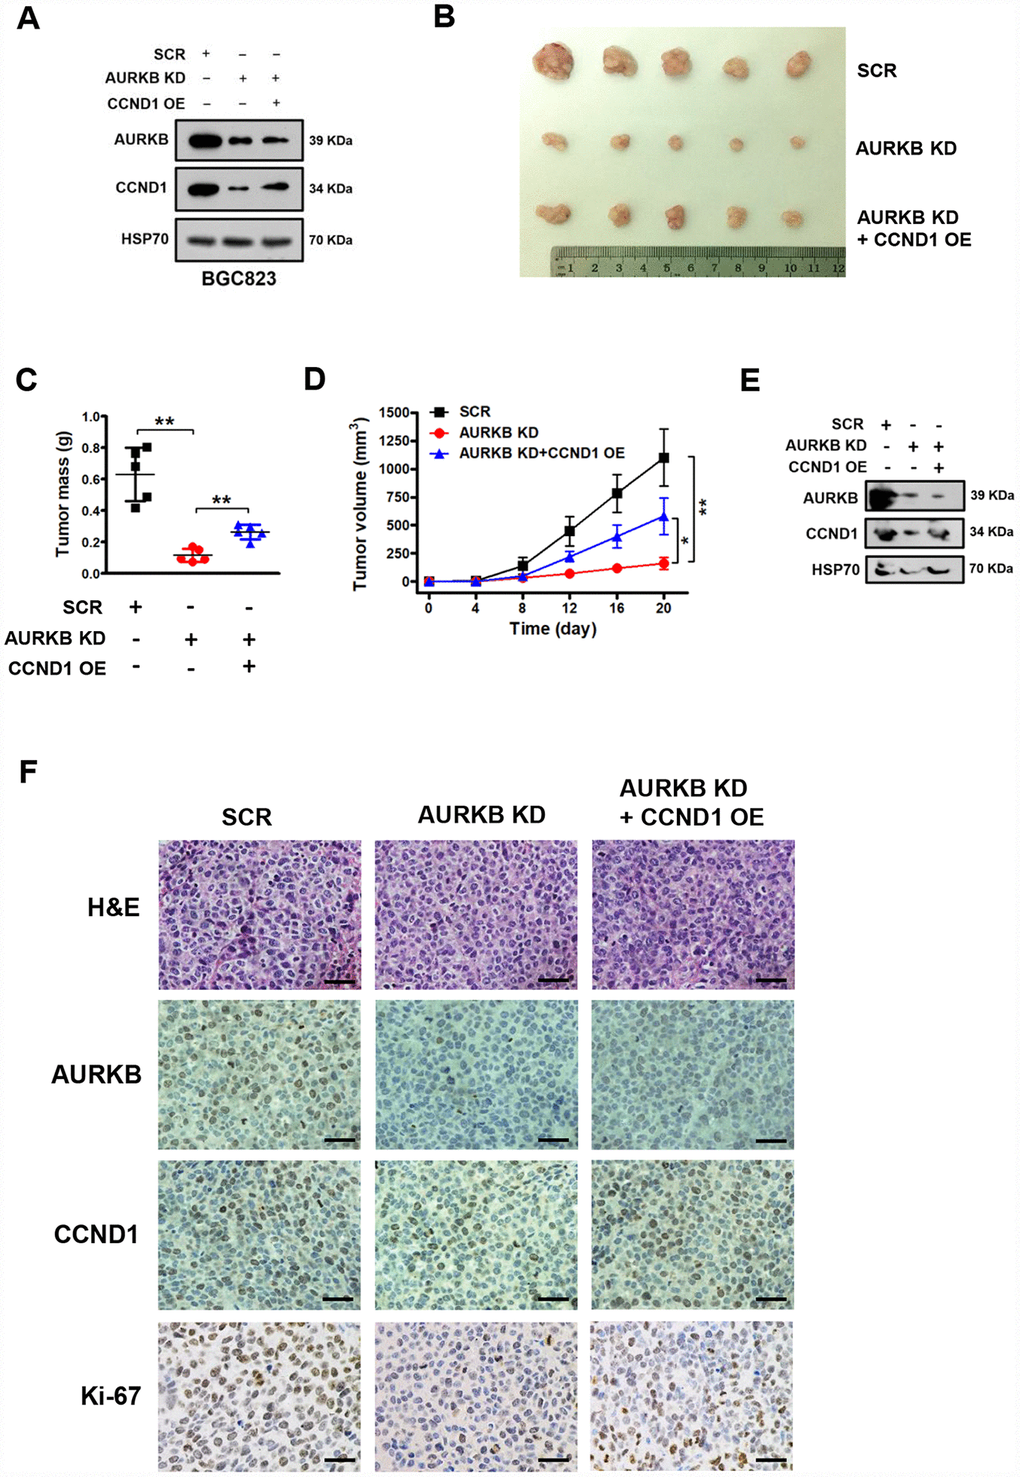 AURKB promotes gastric cancer cell growth by regulating CCND1 in vivo. (A) Western blot analysis of the protein levels of AURKB, CCND1 and HSP70 in stable BGC823 cell lines. HSP70 was used as the endogenous loading control. (B) Photograph of xenograft tumors excised from mice in the scrambled (SCR) control, AURKB KD and AURKB KD + CCND1 OE groups. (C) Tumor masses of xenograft tumors excised from mice in the SCR control, AURKB KD and AURKB KD + CCND1 OE groups. Data are presented as the means ± SDs; **, P D) Tumor volumes were examined on the indicated days. Data are presented as the means ± SDs; *, P E) Western blotting analysis of AURKB and CCND1 expression in xenograft tumors excised from mice in the SCR control, AURKB KD and AURKB KD + CCND1 OE groups. HSP70 was used as the endogenous loading control. (F) Hematoxylin and eosin (H&E) staining and IHC staining of AURKB, CCND1 and Ki-67 in xenograft tumors excised from mice in the SCR control, AURKB KD and AURKB KD + CCND1 OE groups.